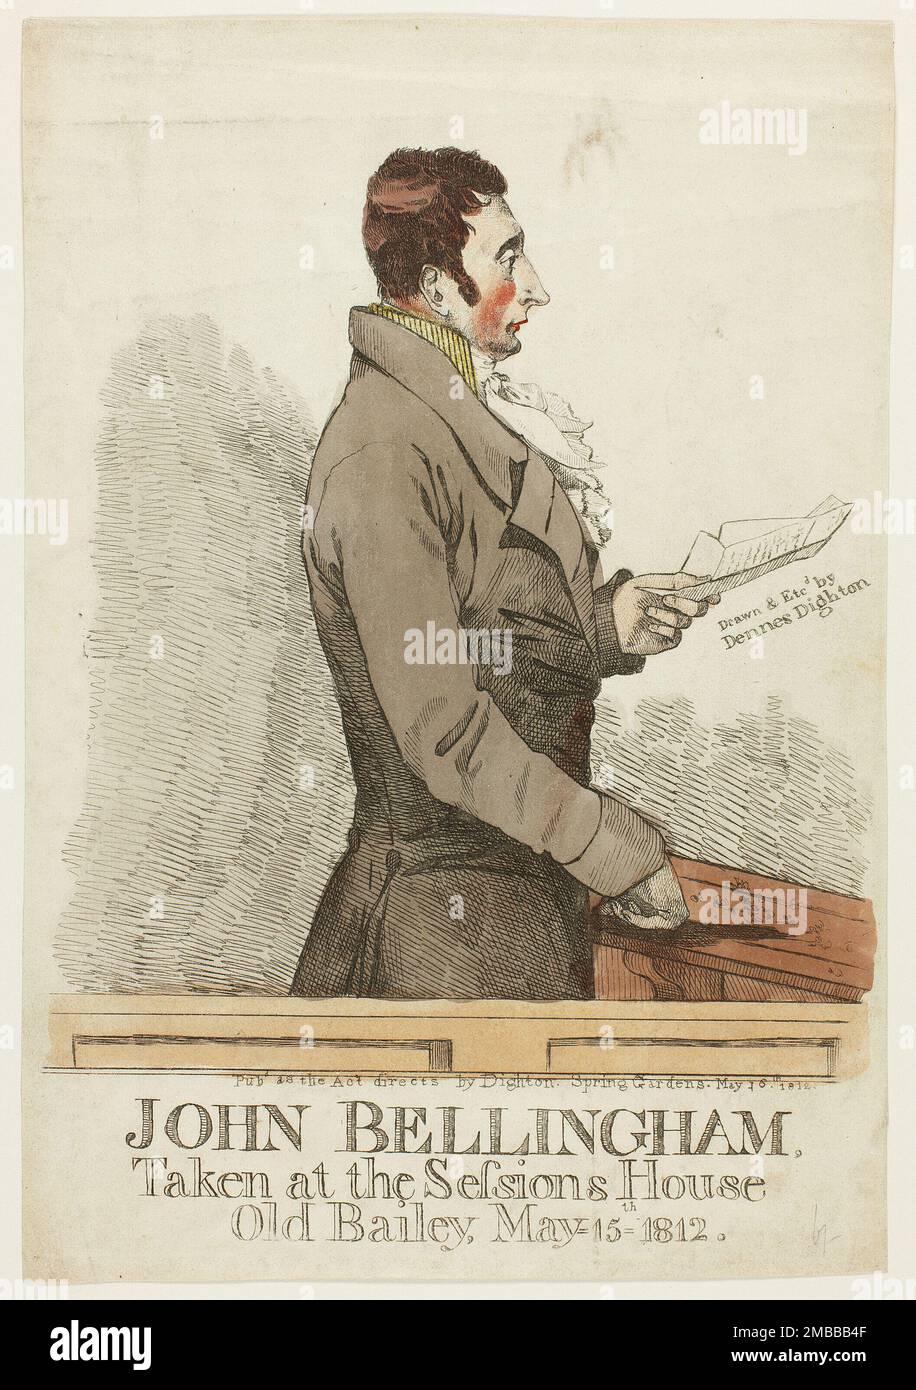 John Bellingham, n.d. 'Taken at the Sessions House, Old Bailey, May 15th 1812'. British Prime Minister Spencer Perceval was shot and killed in the lobby of the House of Commons by John Bellingham, a merchant who had been wrongly imprisoned in Russia. He bore a grievance against the British government after it had rejected his petitions for compensation. Bellingham was hanged in public three days after being found guilty. Stock Photo